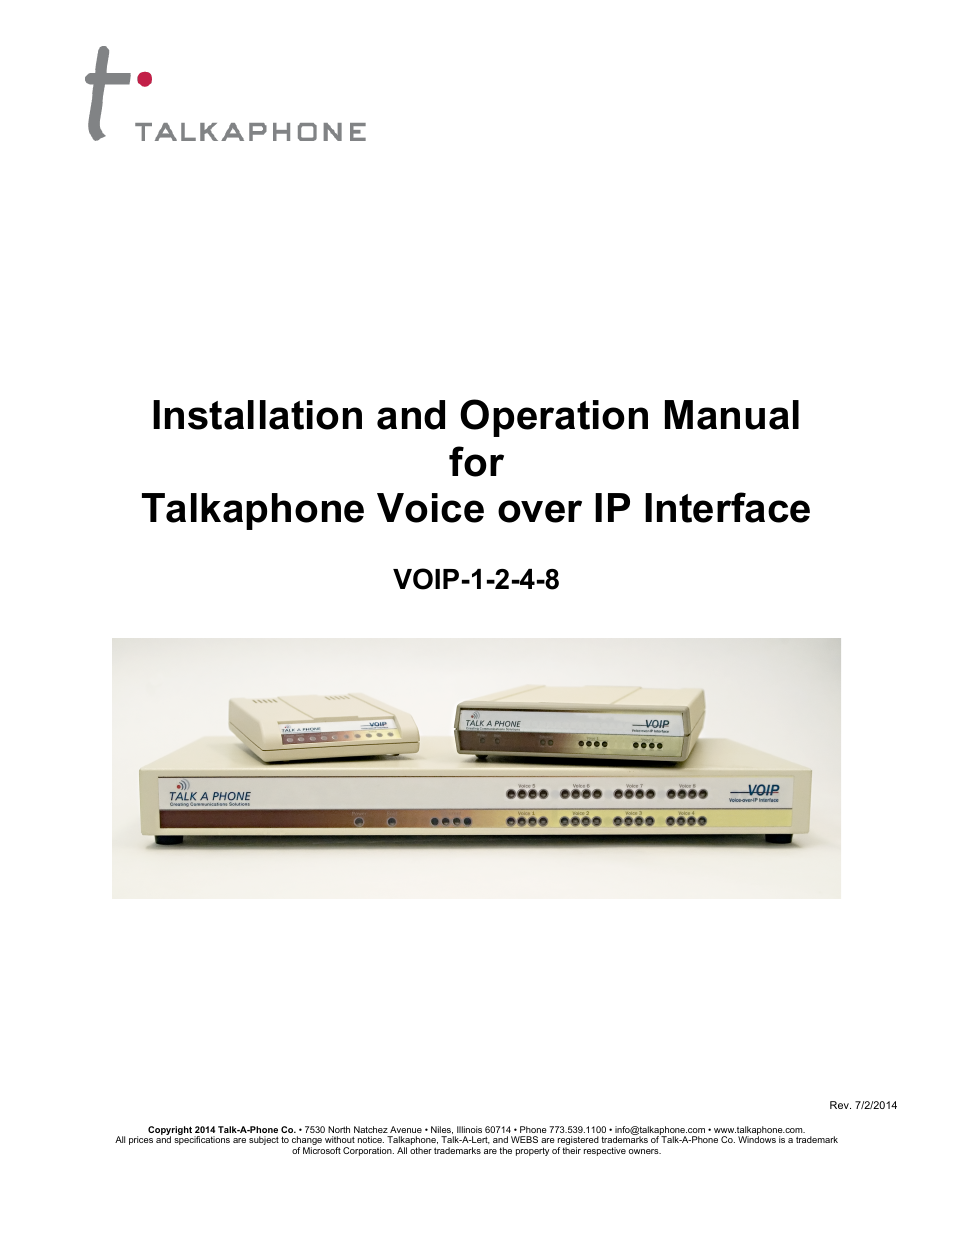 VOIP-1 VoIP Interface (1 channel)